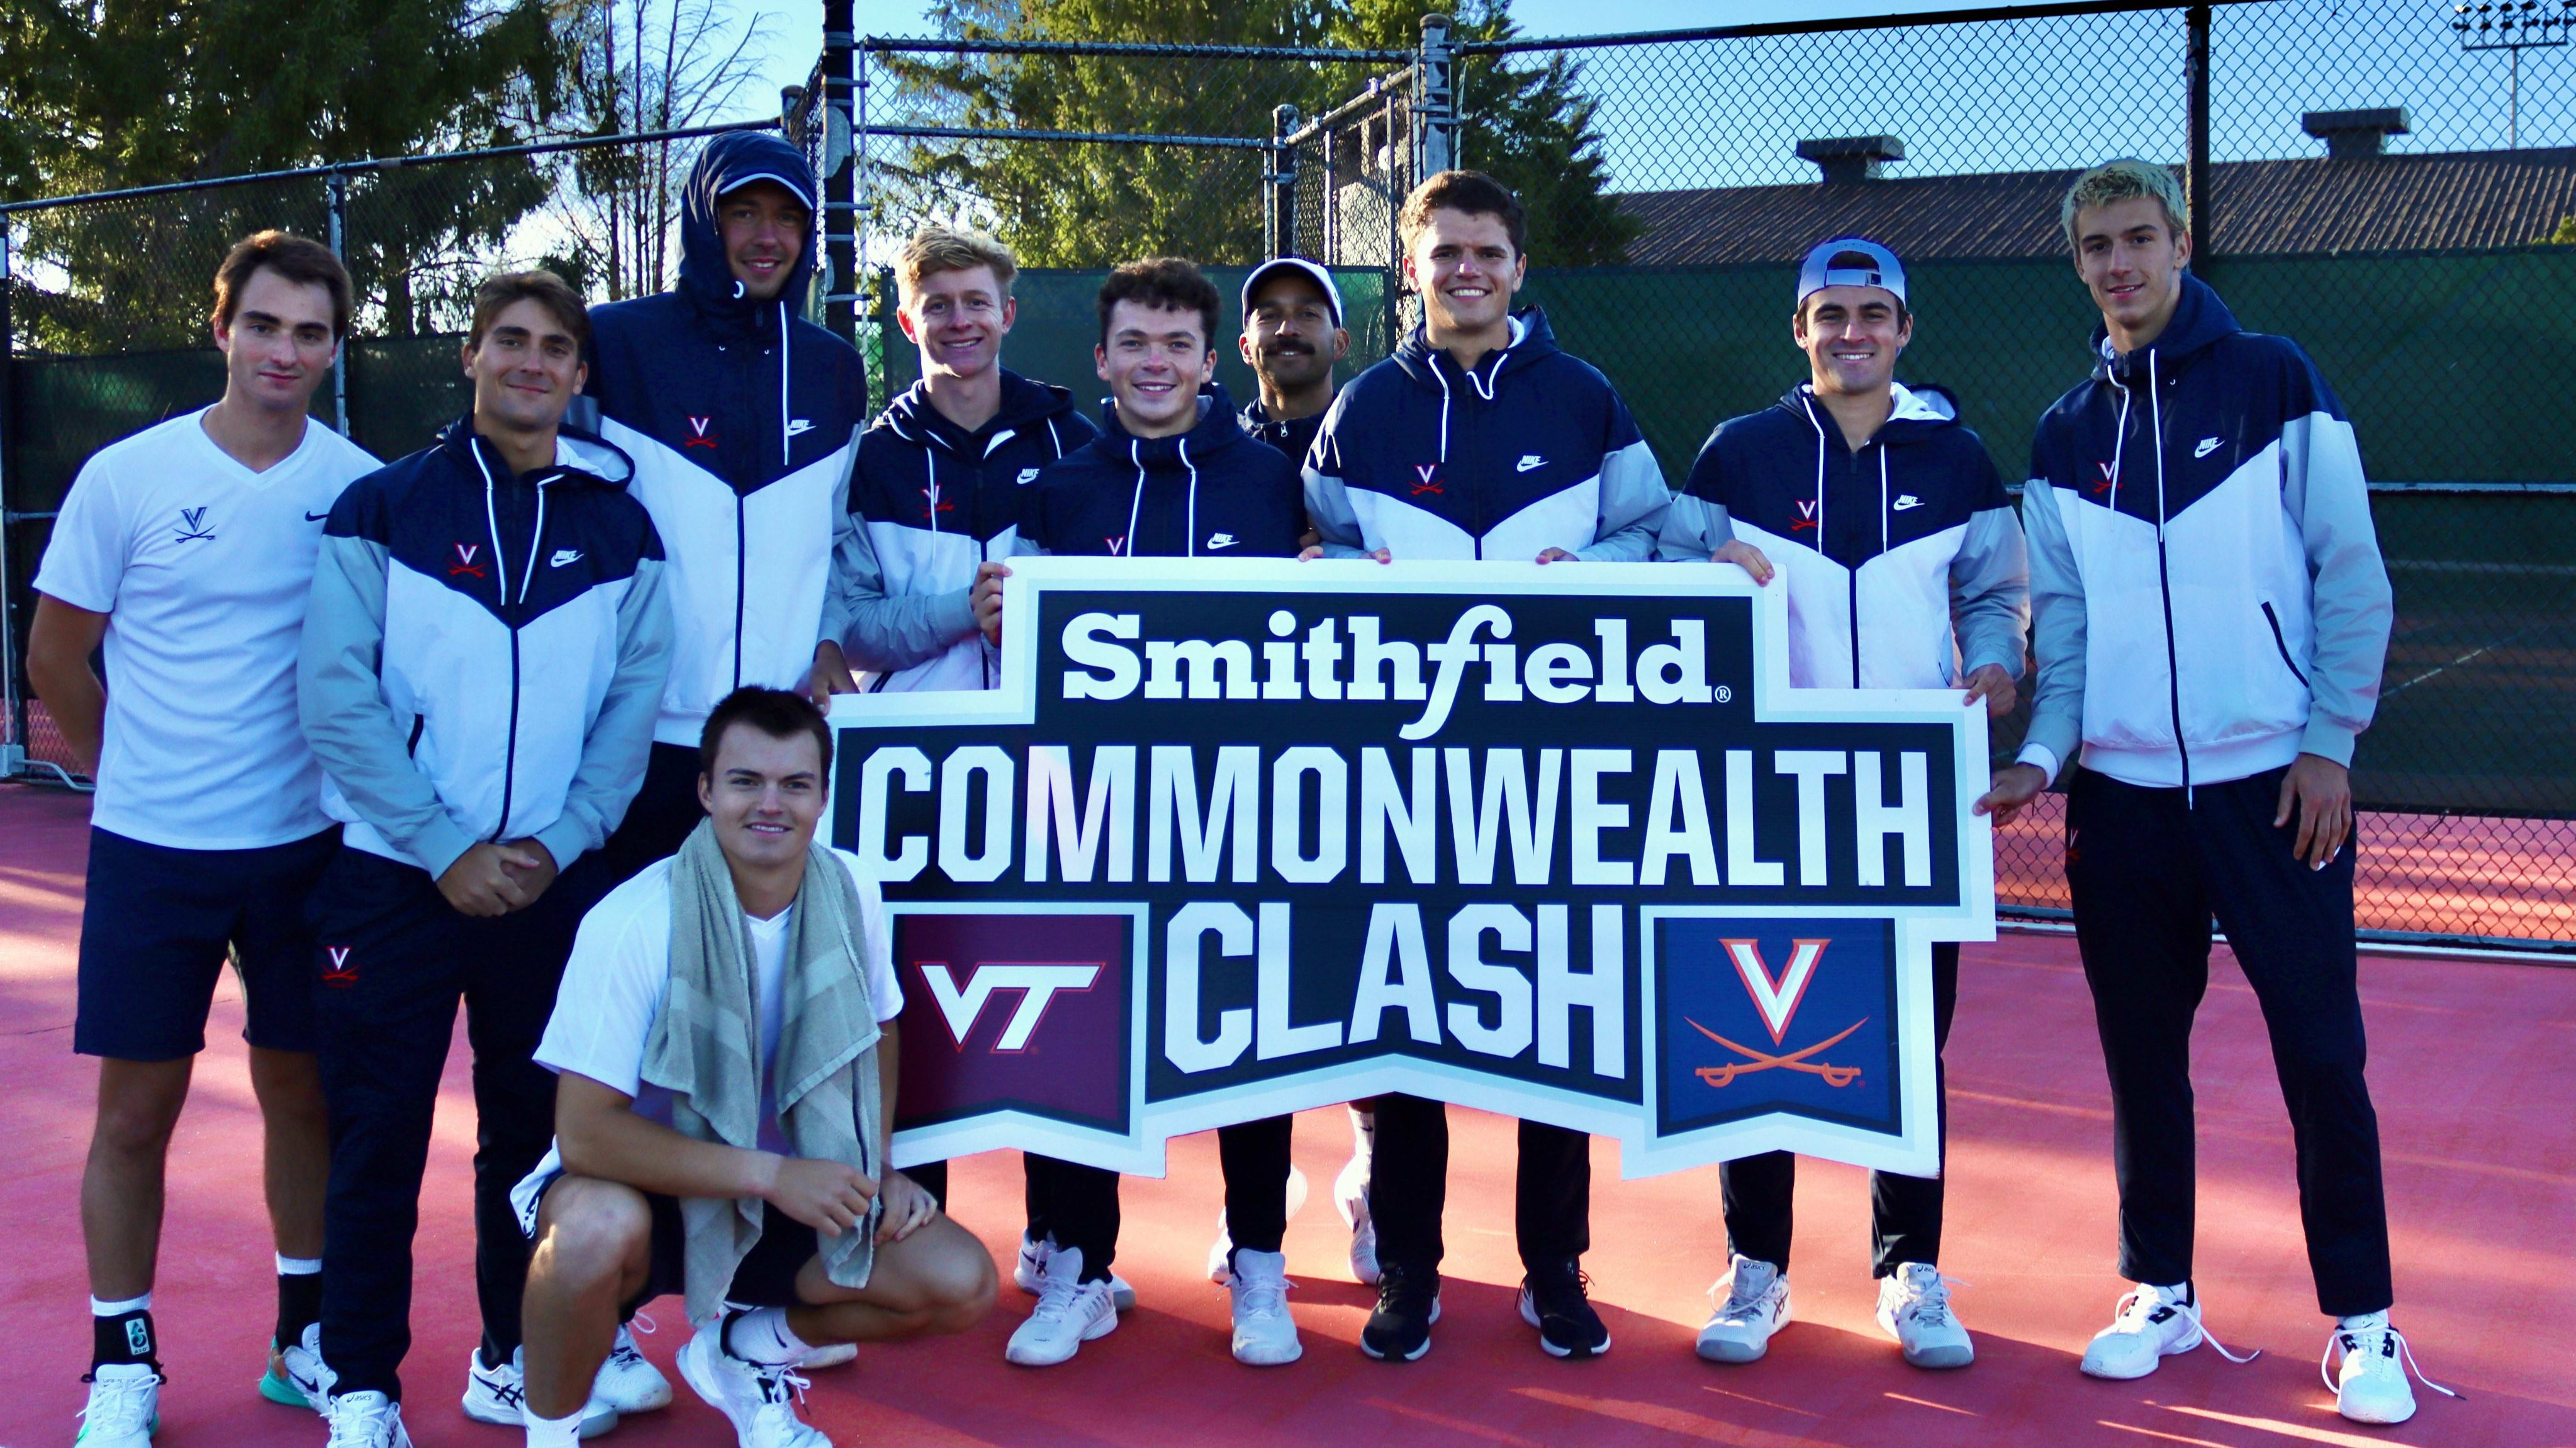 The Virginia men's tennis team celebrates after defeating Virginia Tech in the Commonwealth Clash.